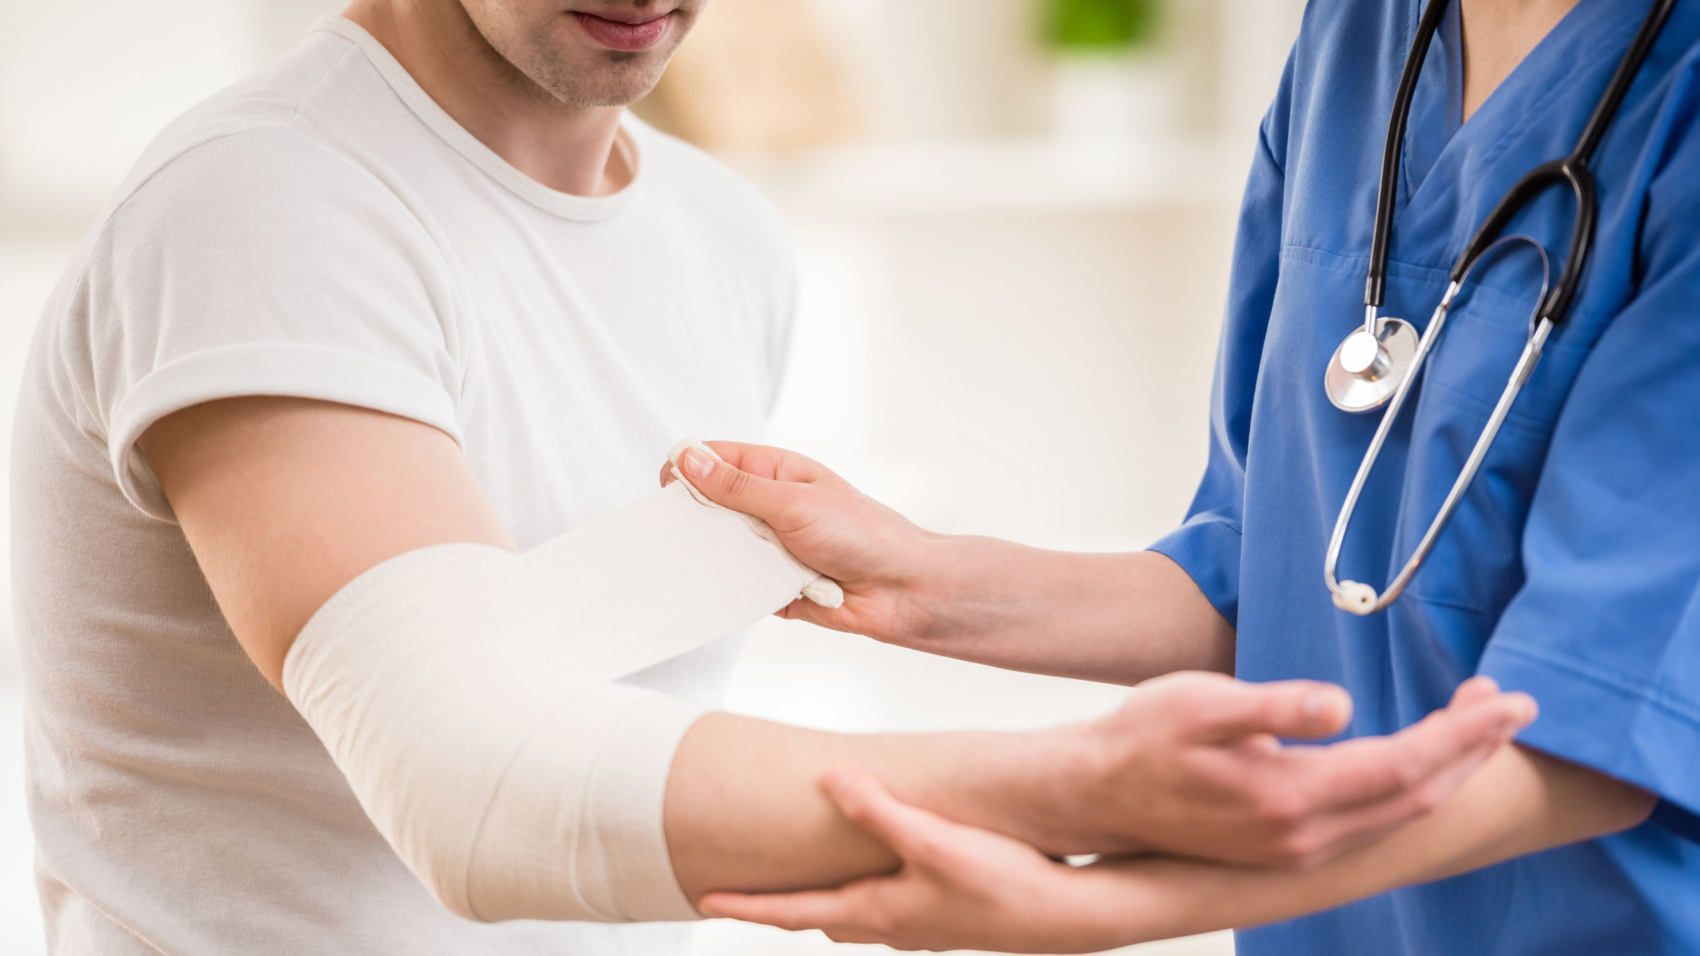 Florida Personal Injury Claims: What Kinds of Damages Can You Sue for?